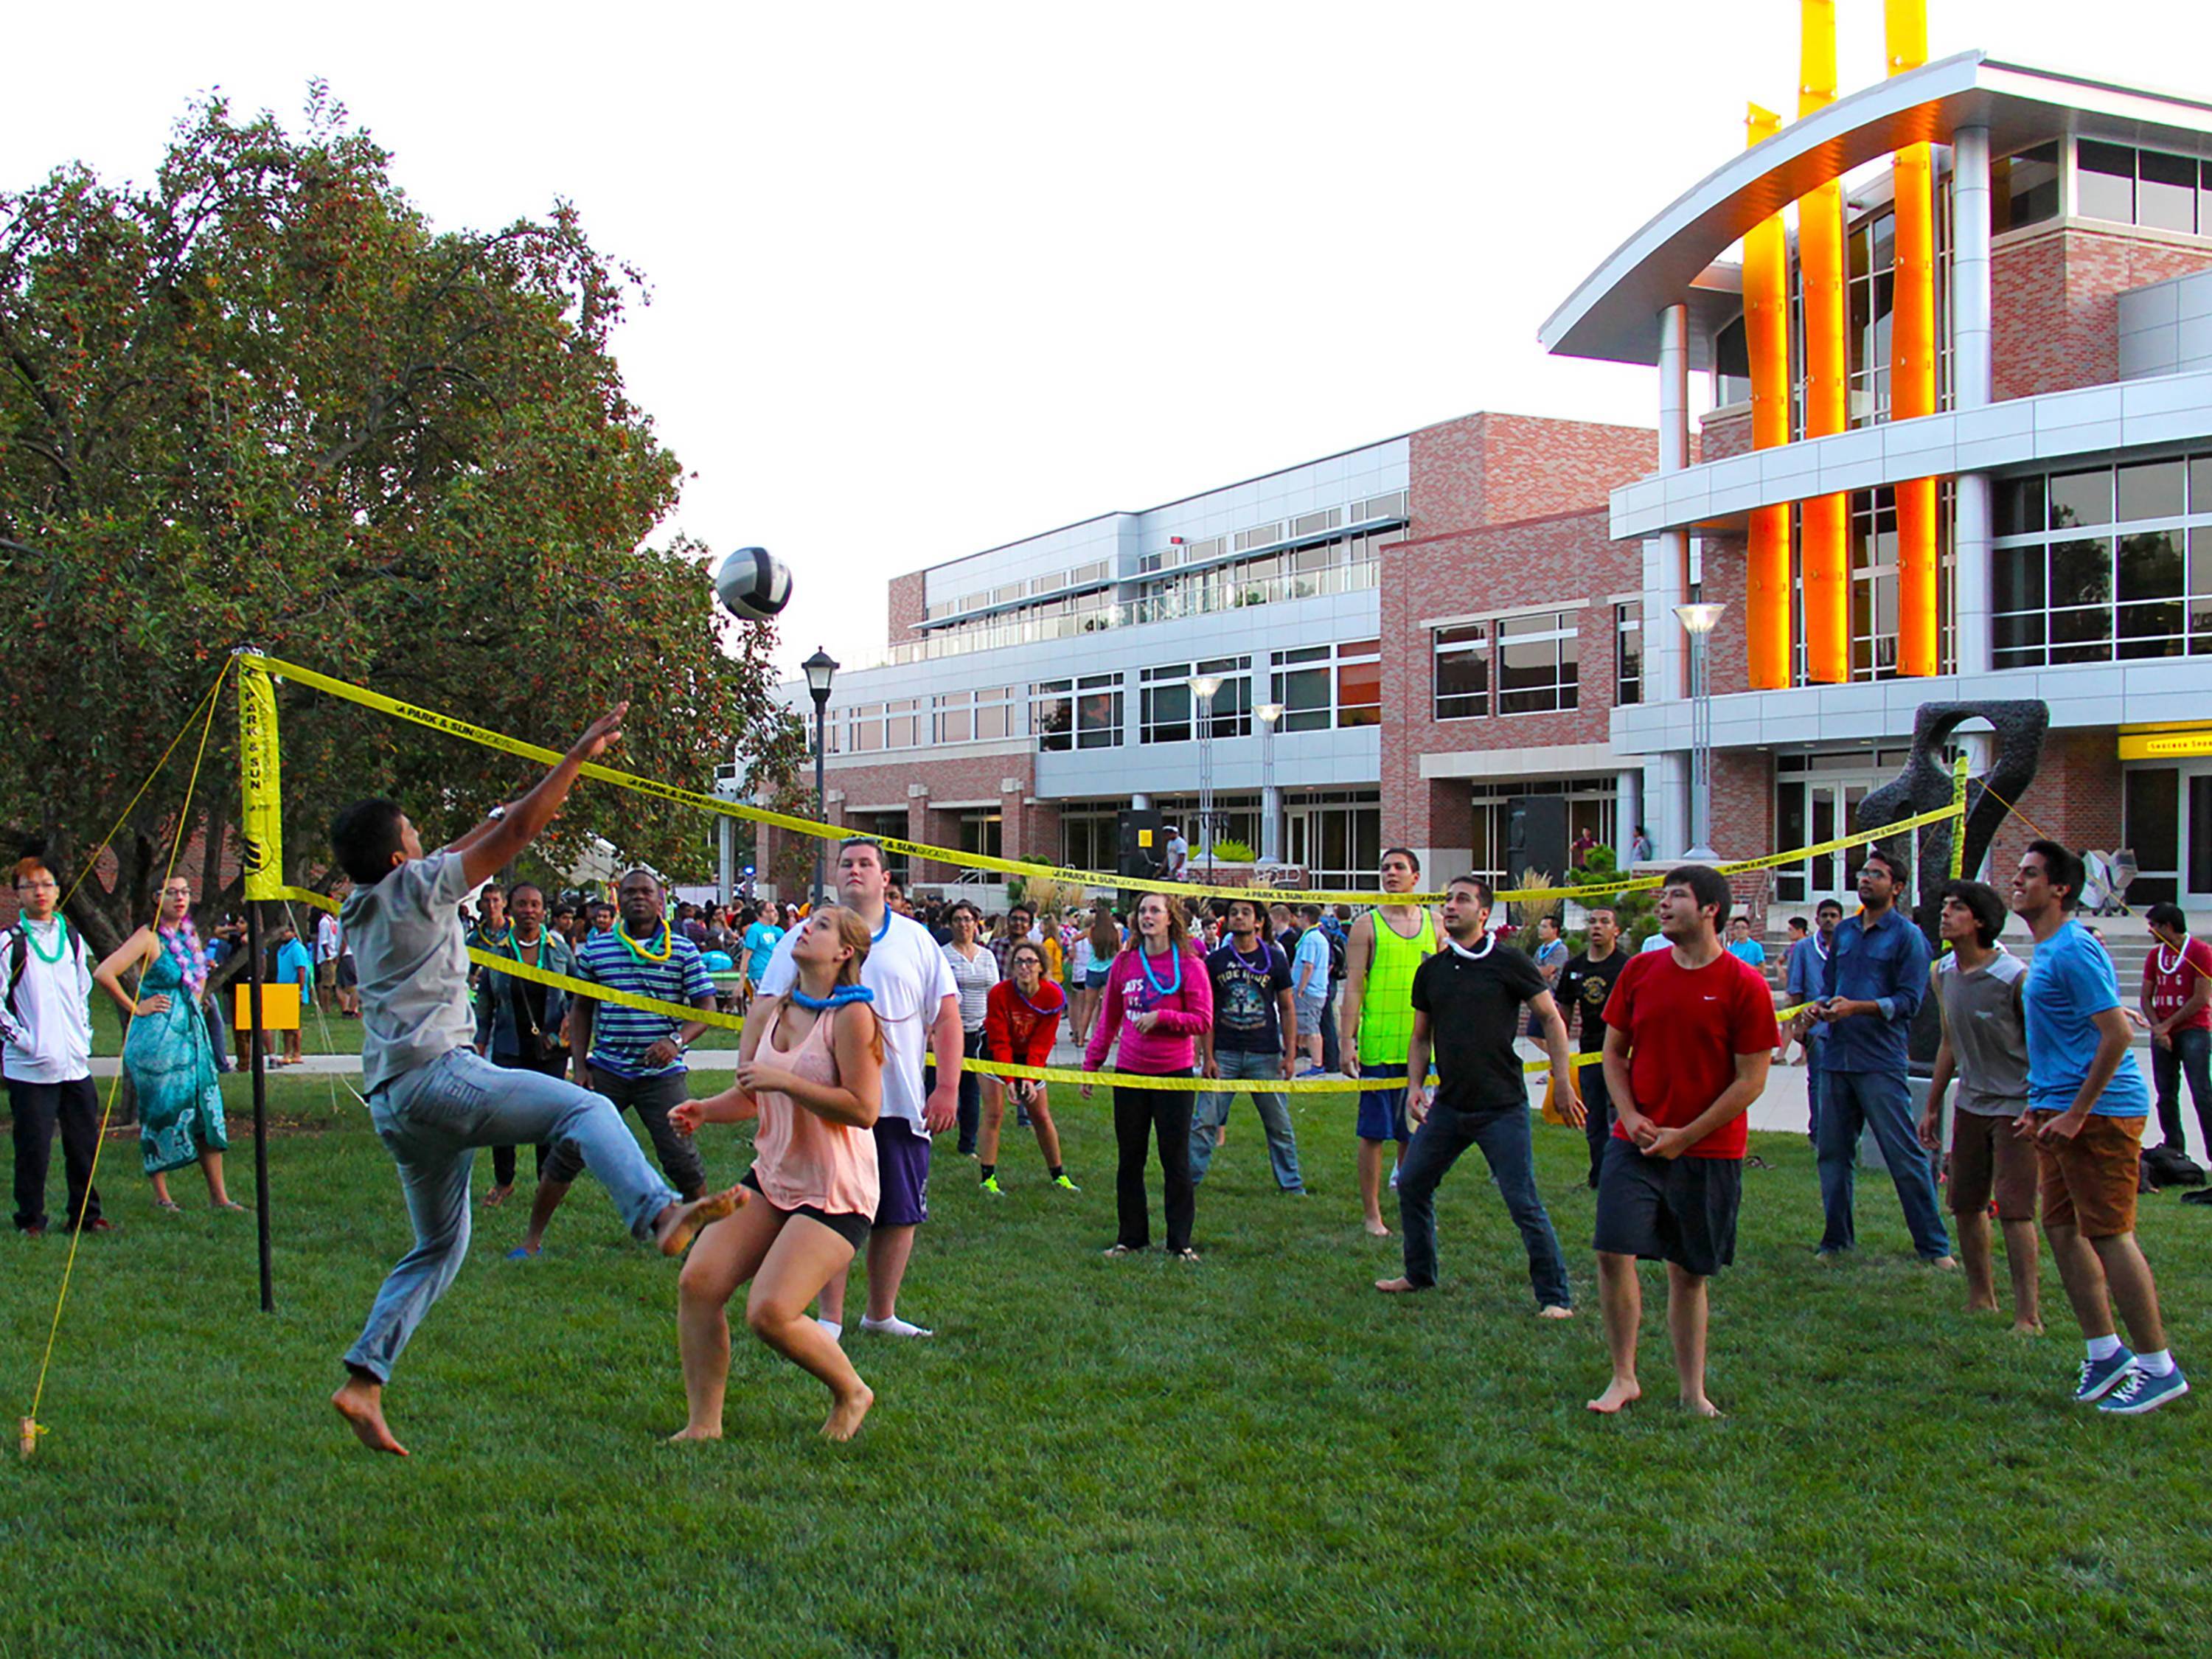 People playing volleyball in front of student center